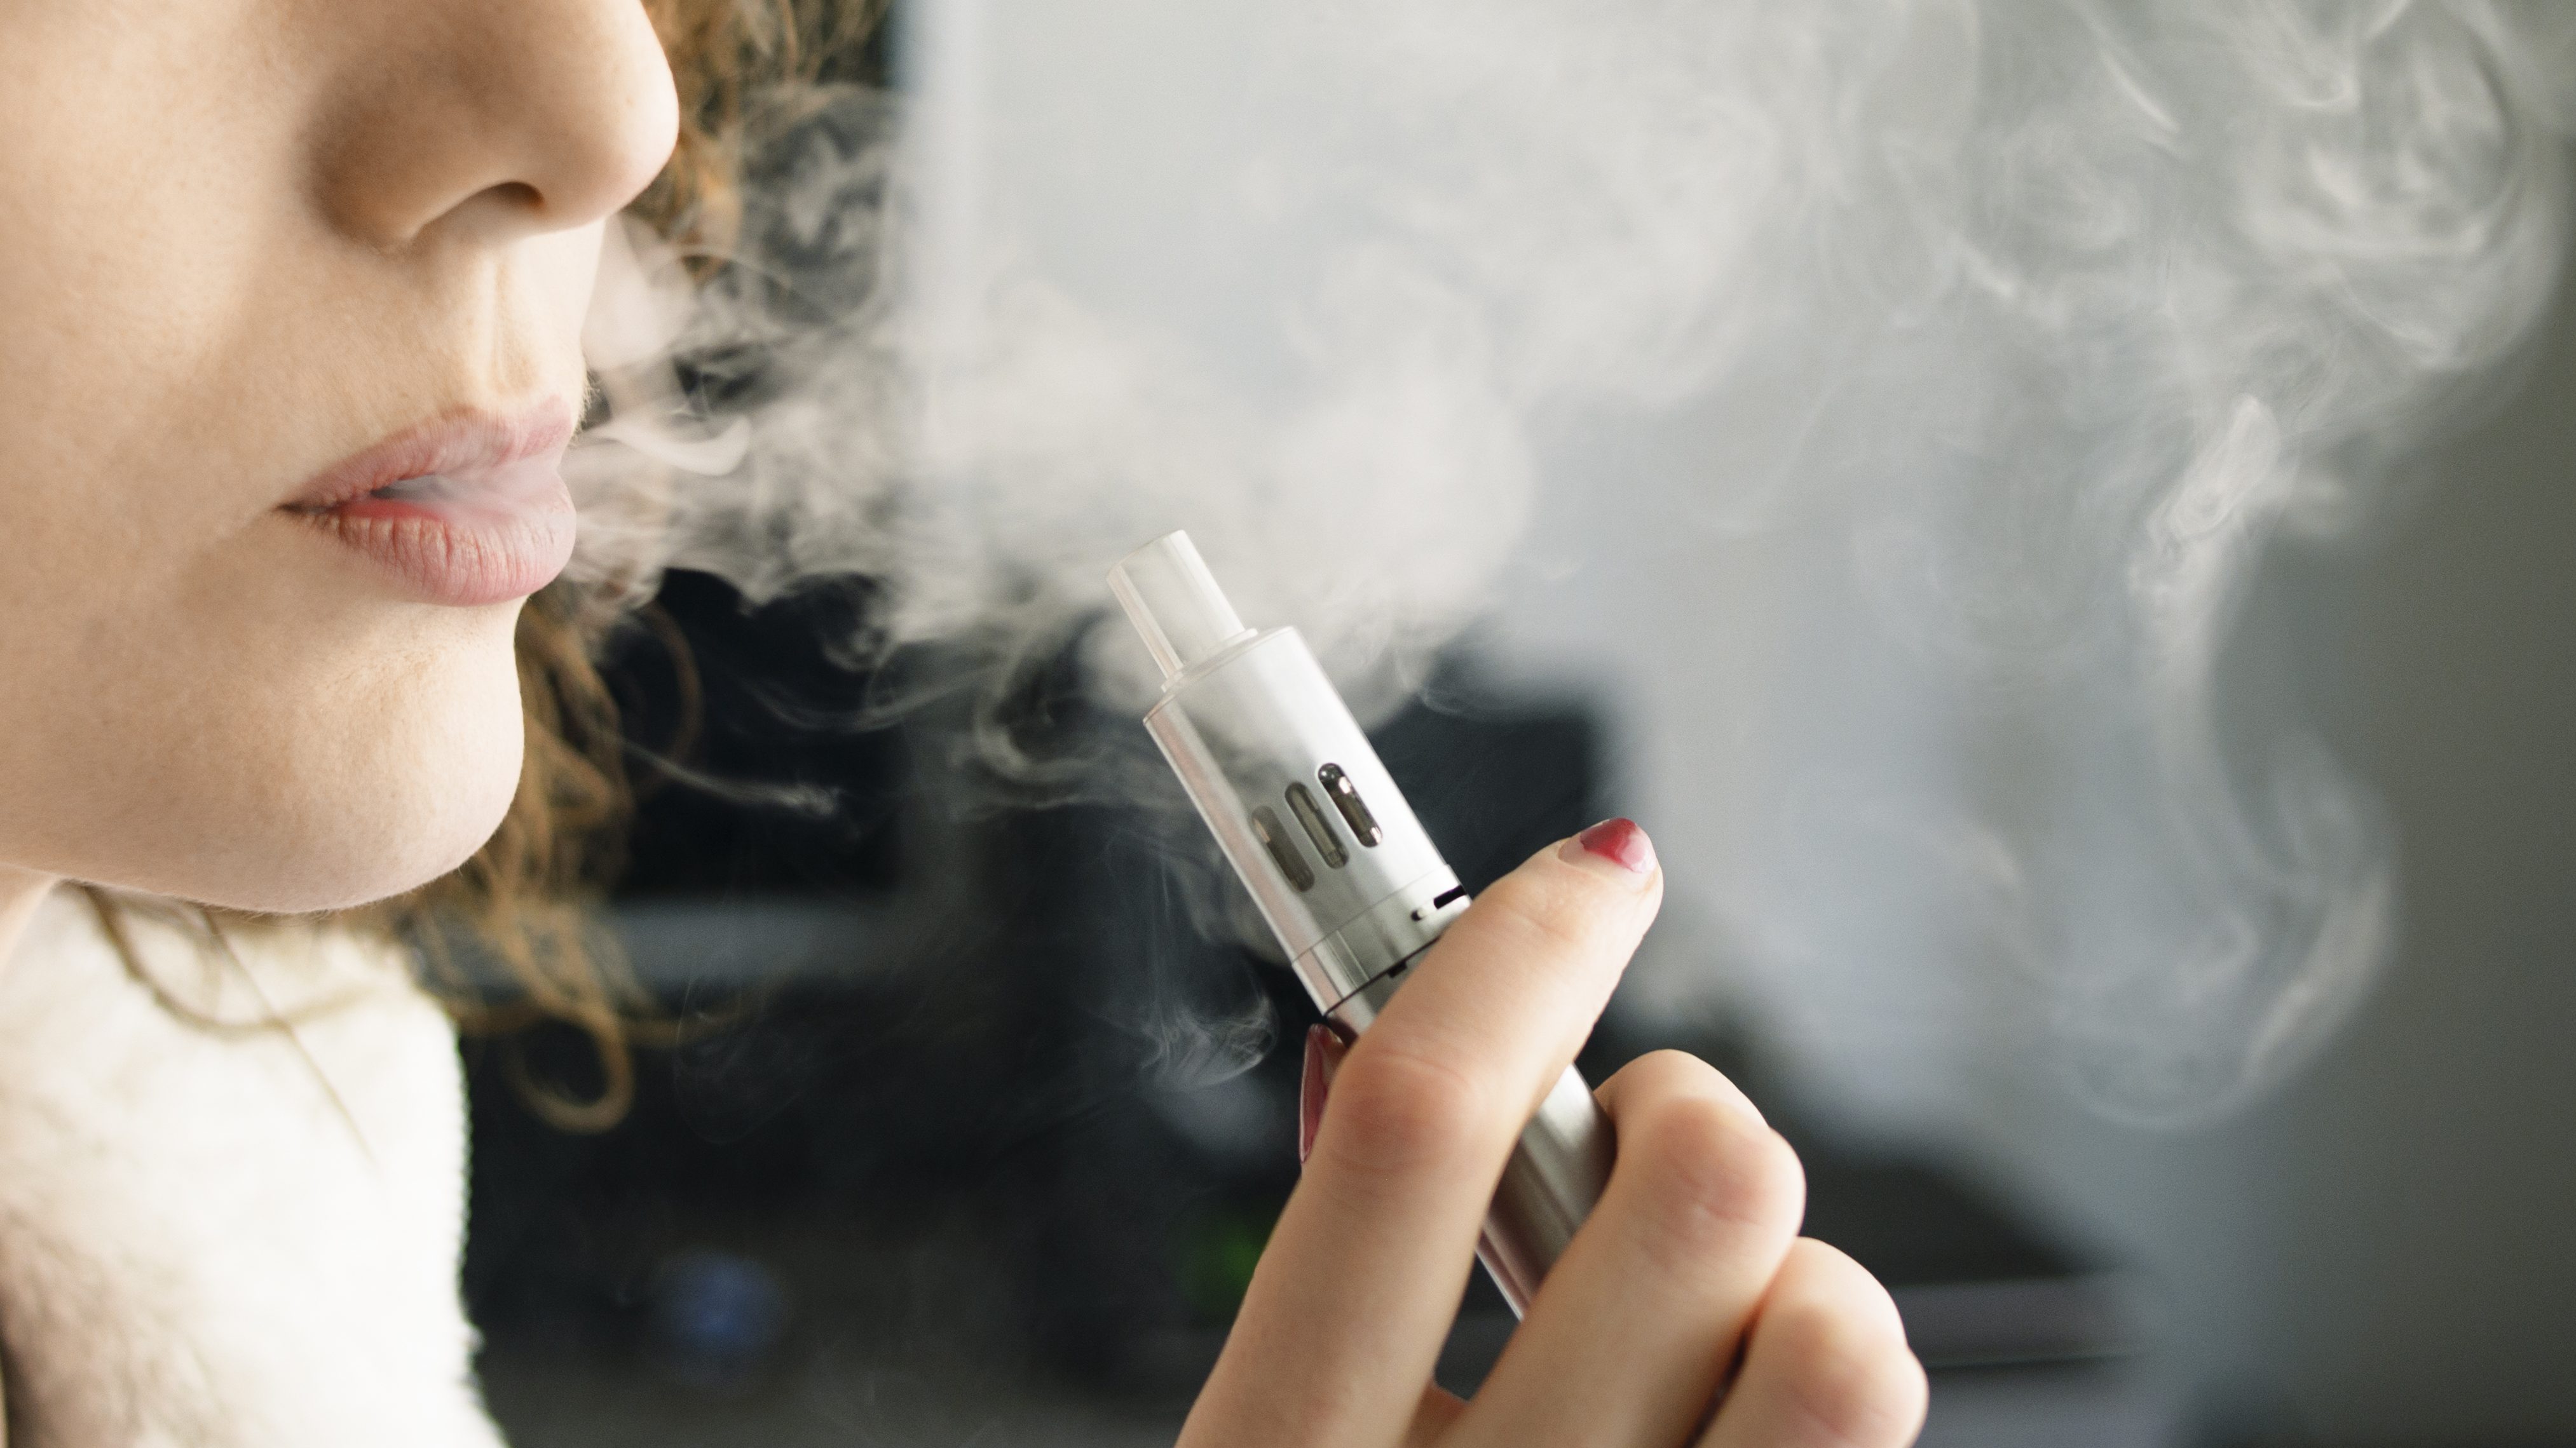 Electronic Cigarettes, ECigs, and Vaporizers In Edmonton